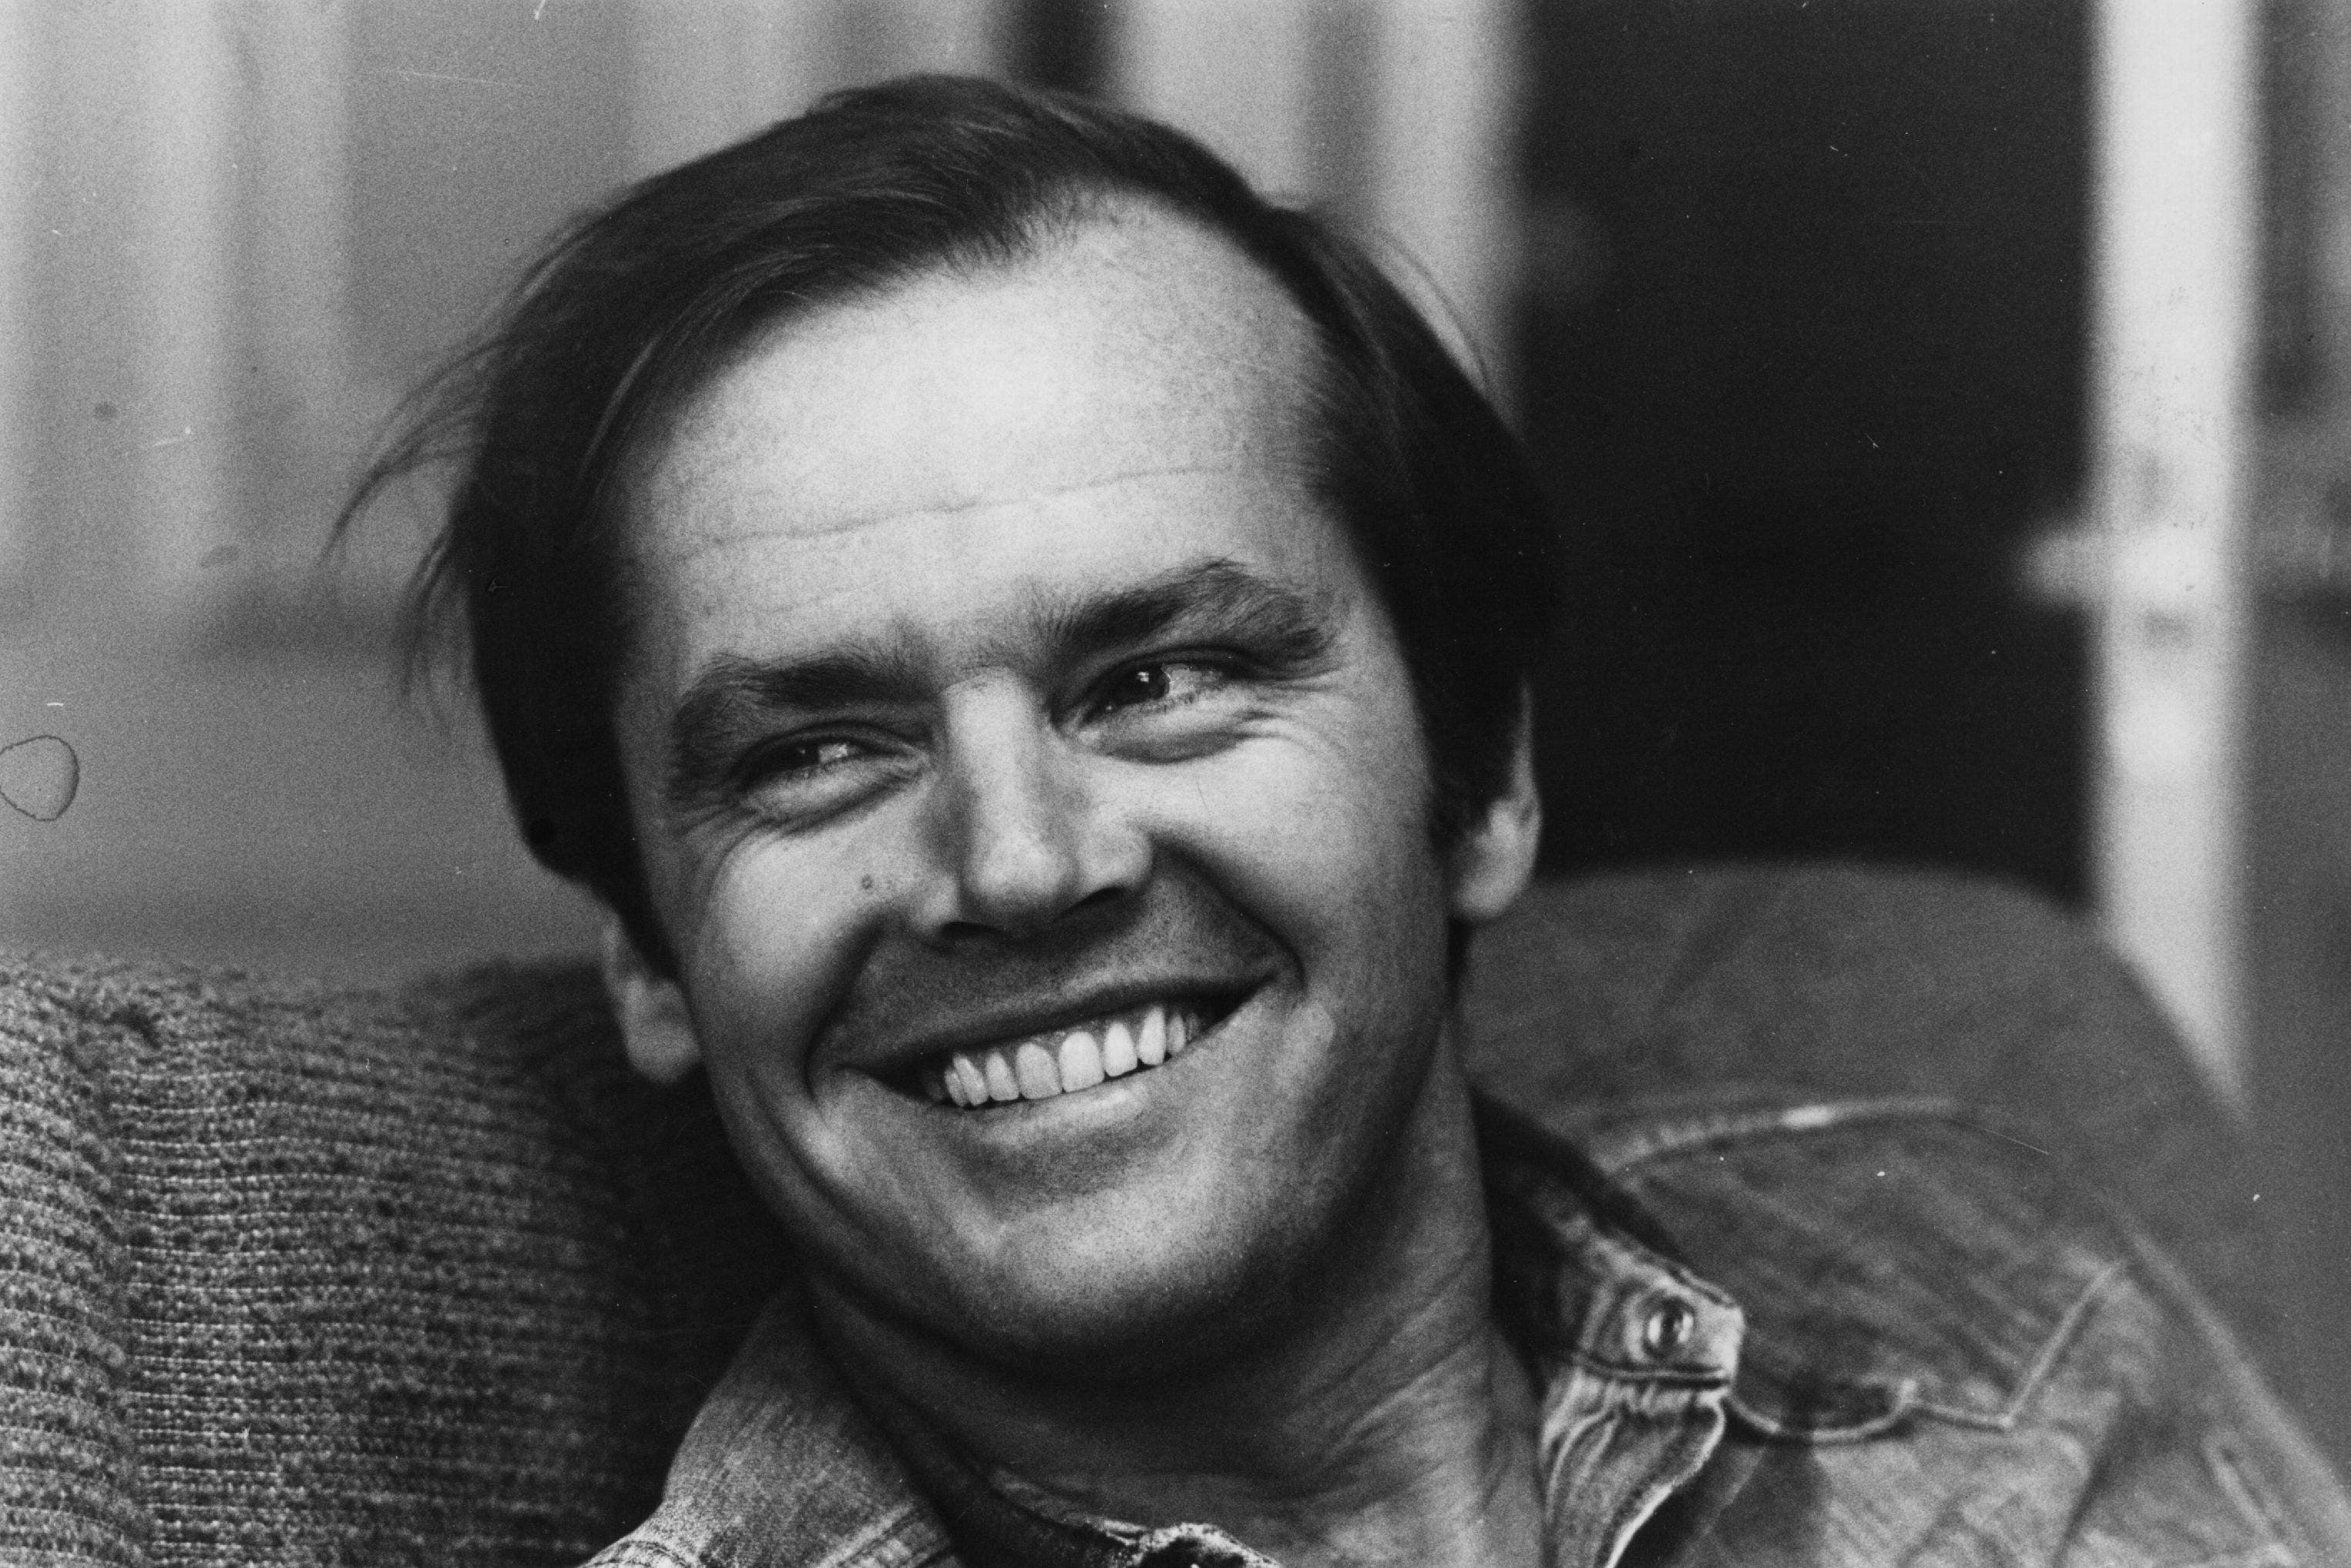 The unofficial retirement of Jack Nicholson, Hollywood’s most charismatic star